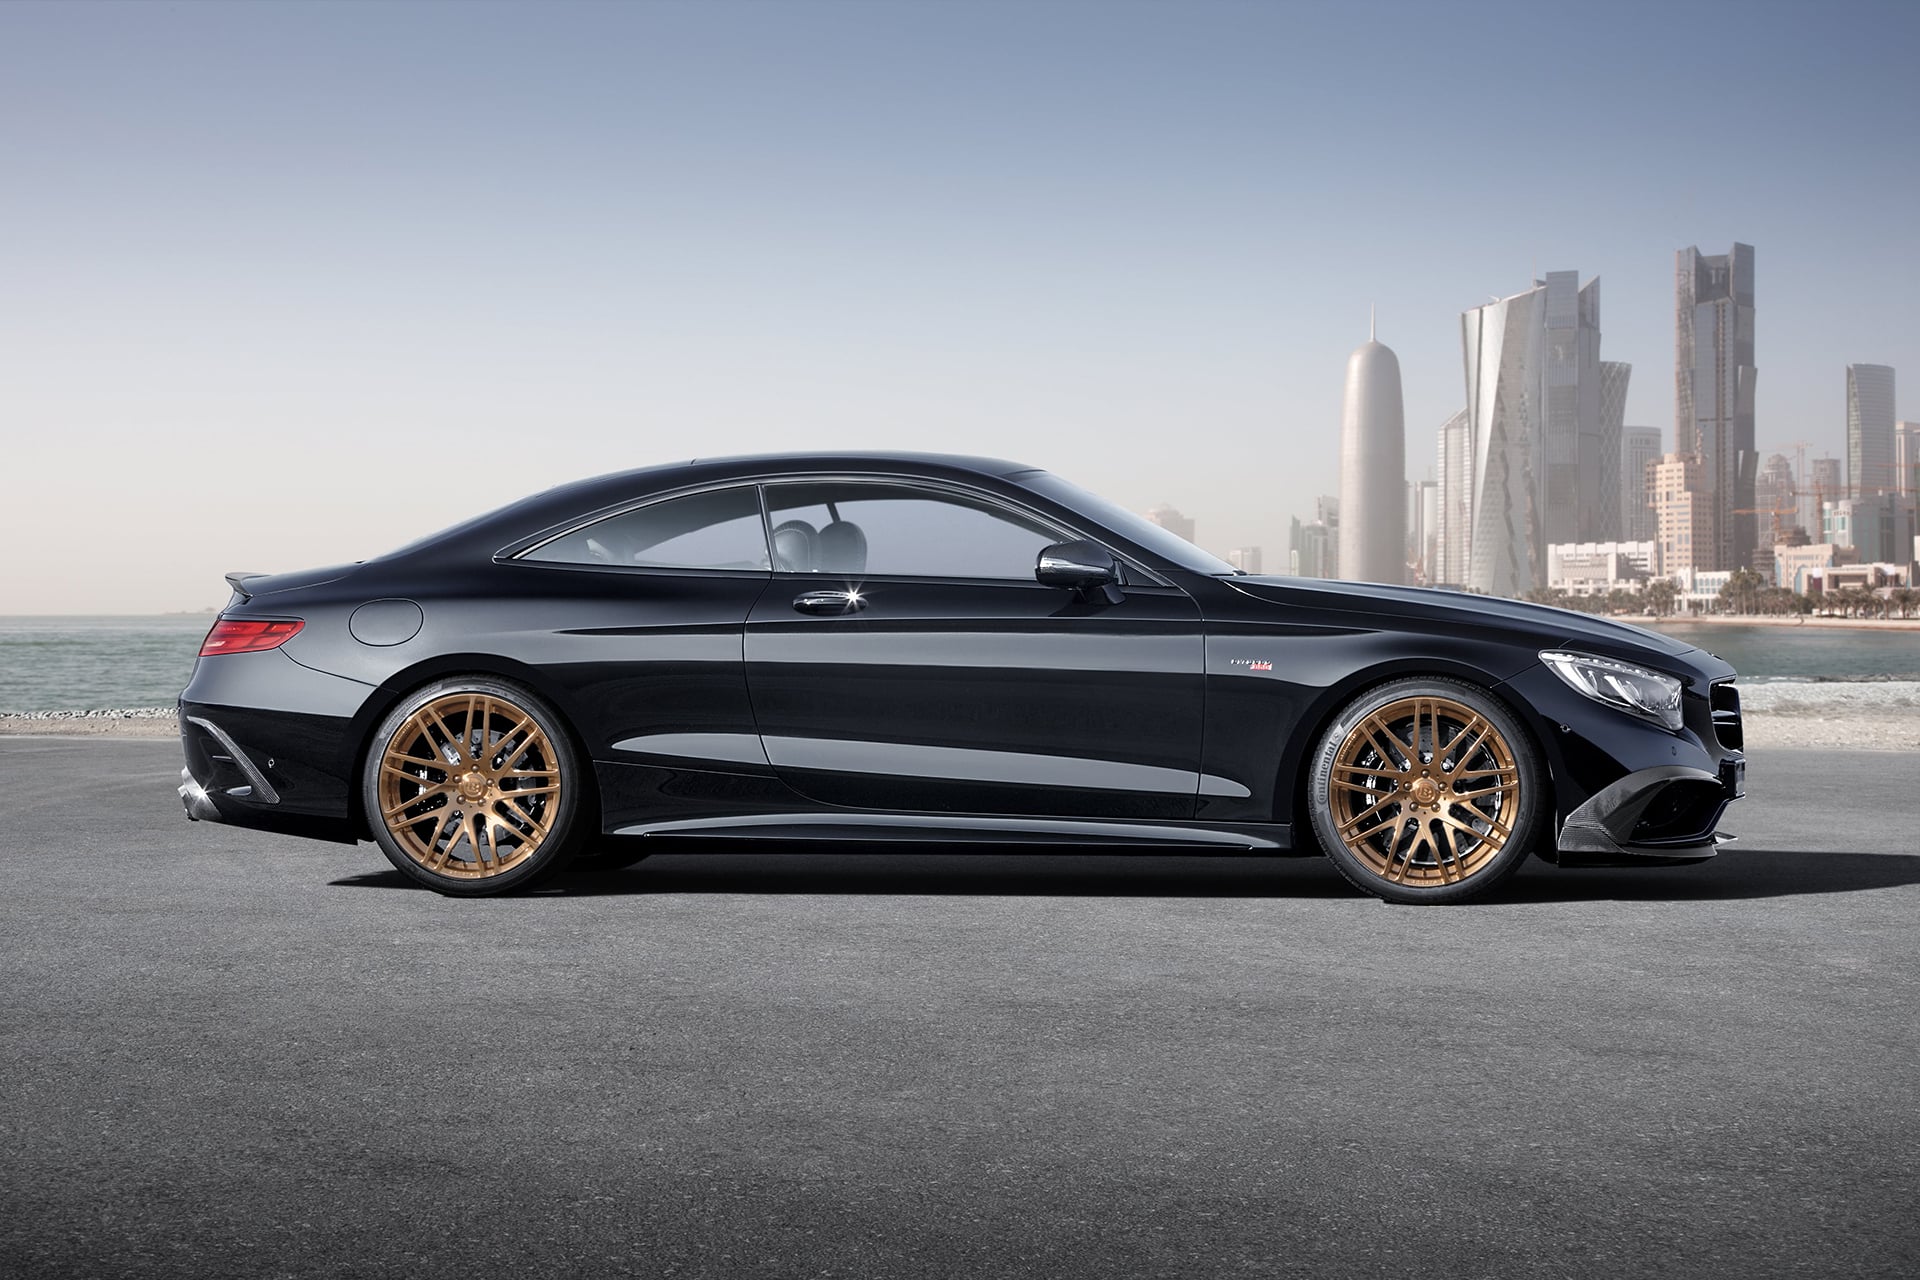 Mercedes Benz AMG S63 Coupe wallpapers HD Download